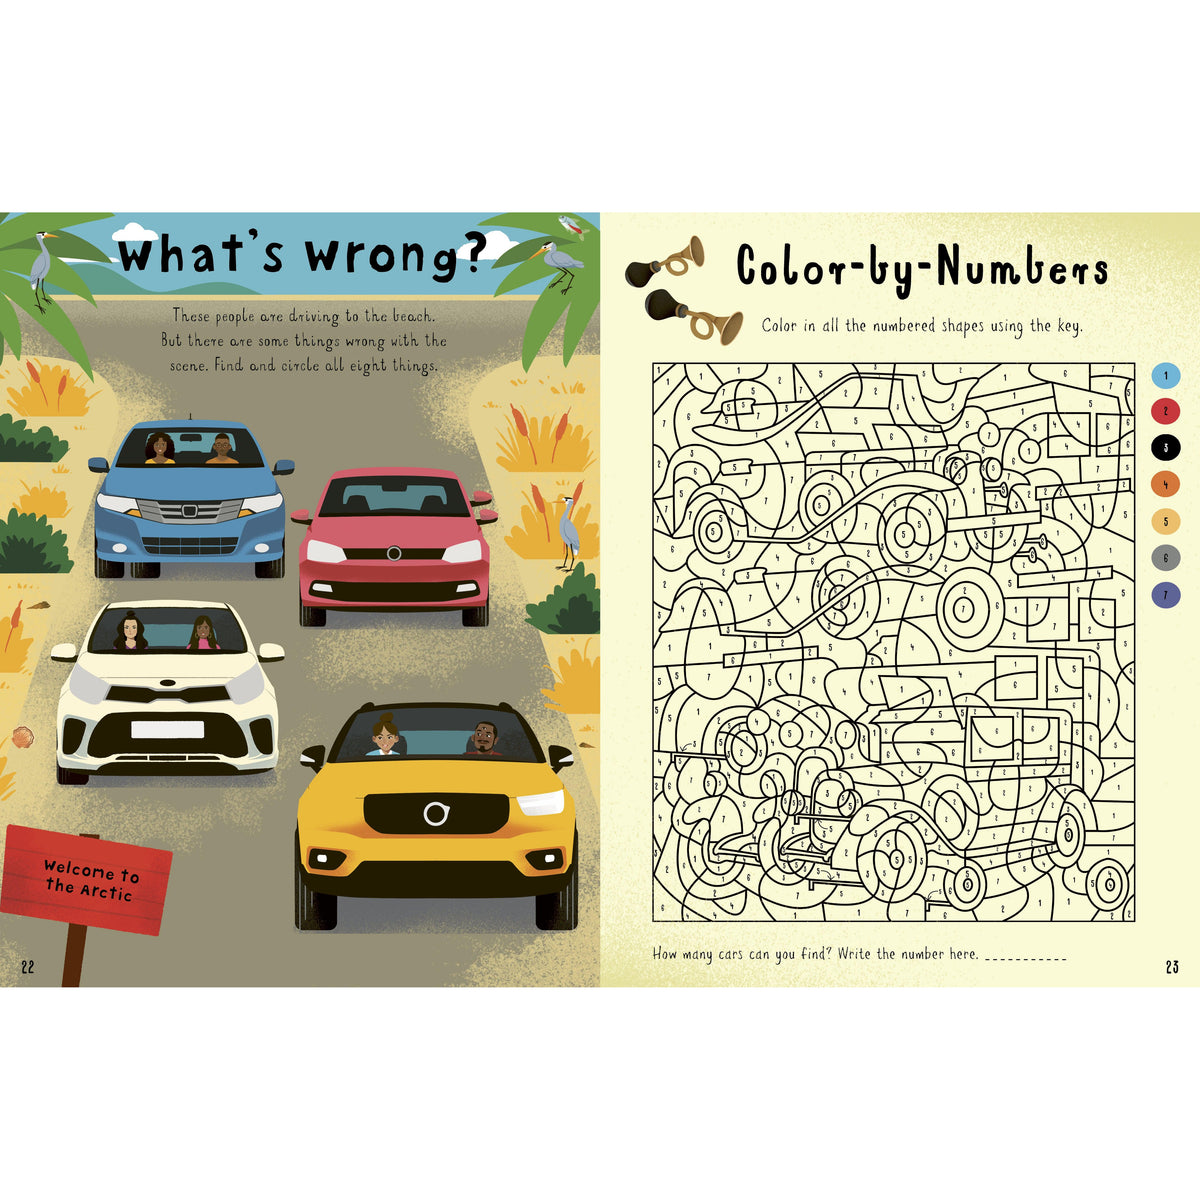 In the Car | Martin-Science &amp; Discovery-Quarto USA | Hachette-Yellow Springs Toy Company